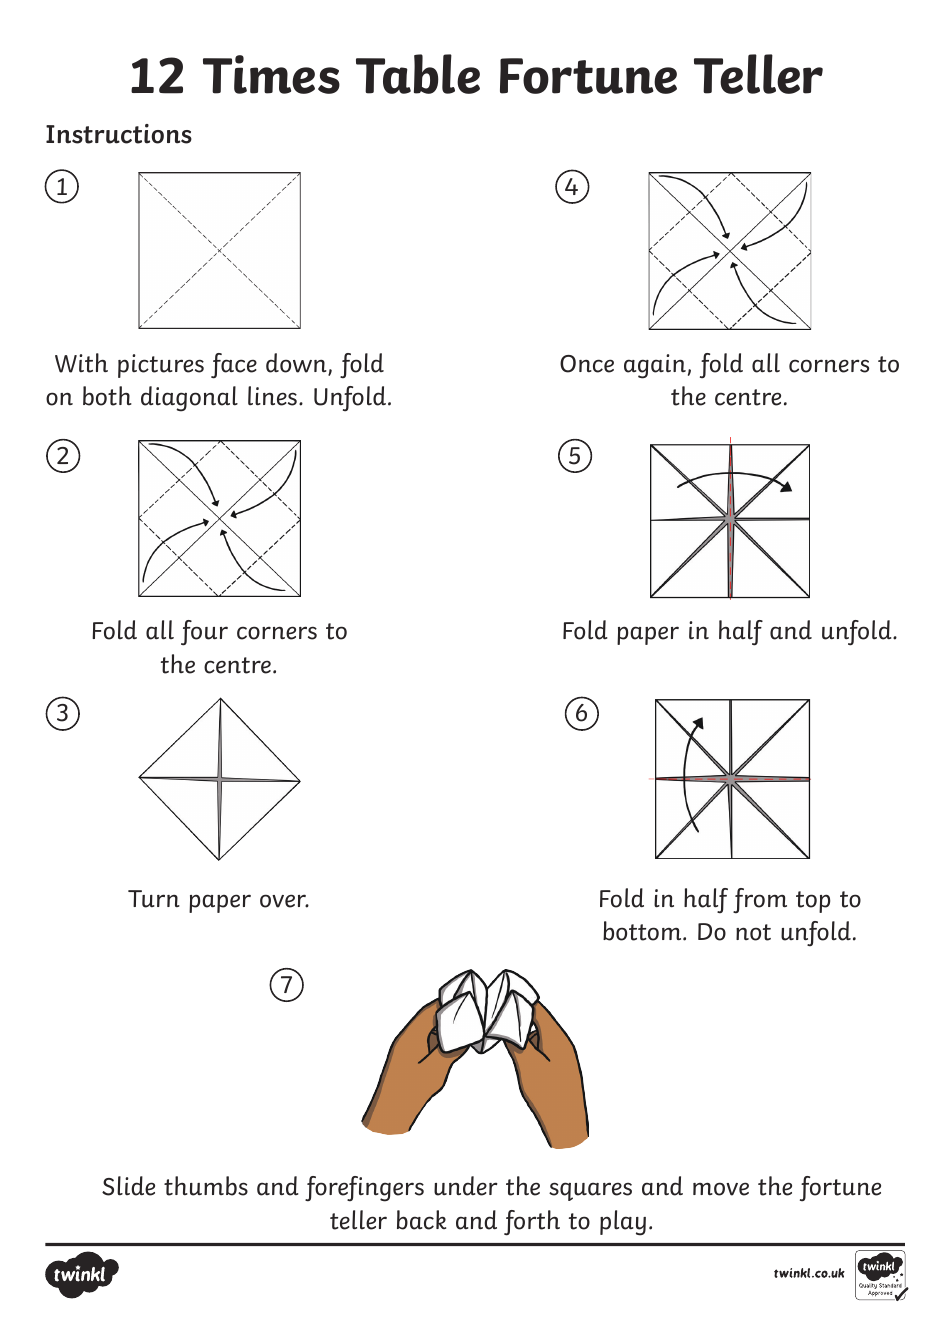 12 Times Table Fortune Teller Template - Fun and interactive math resource for learning multiplication.